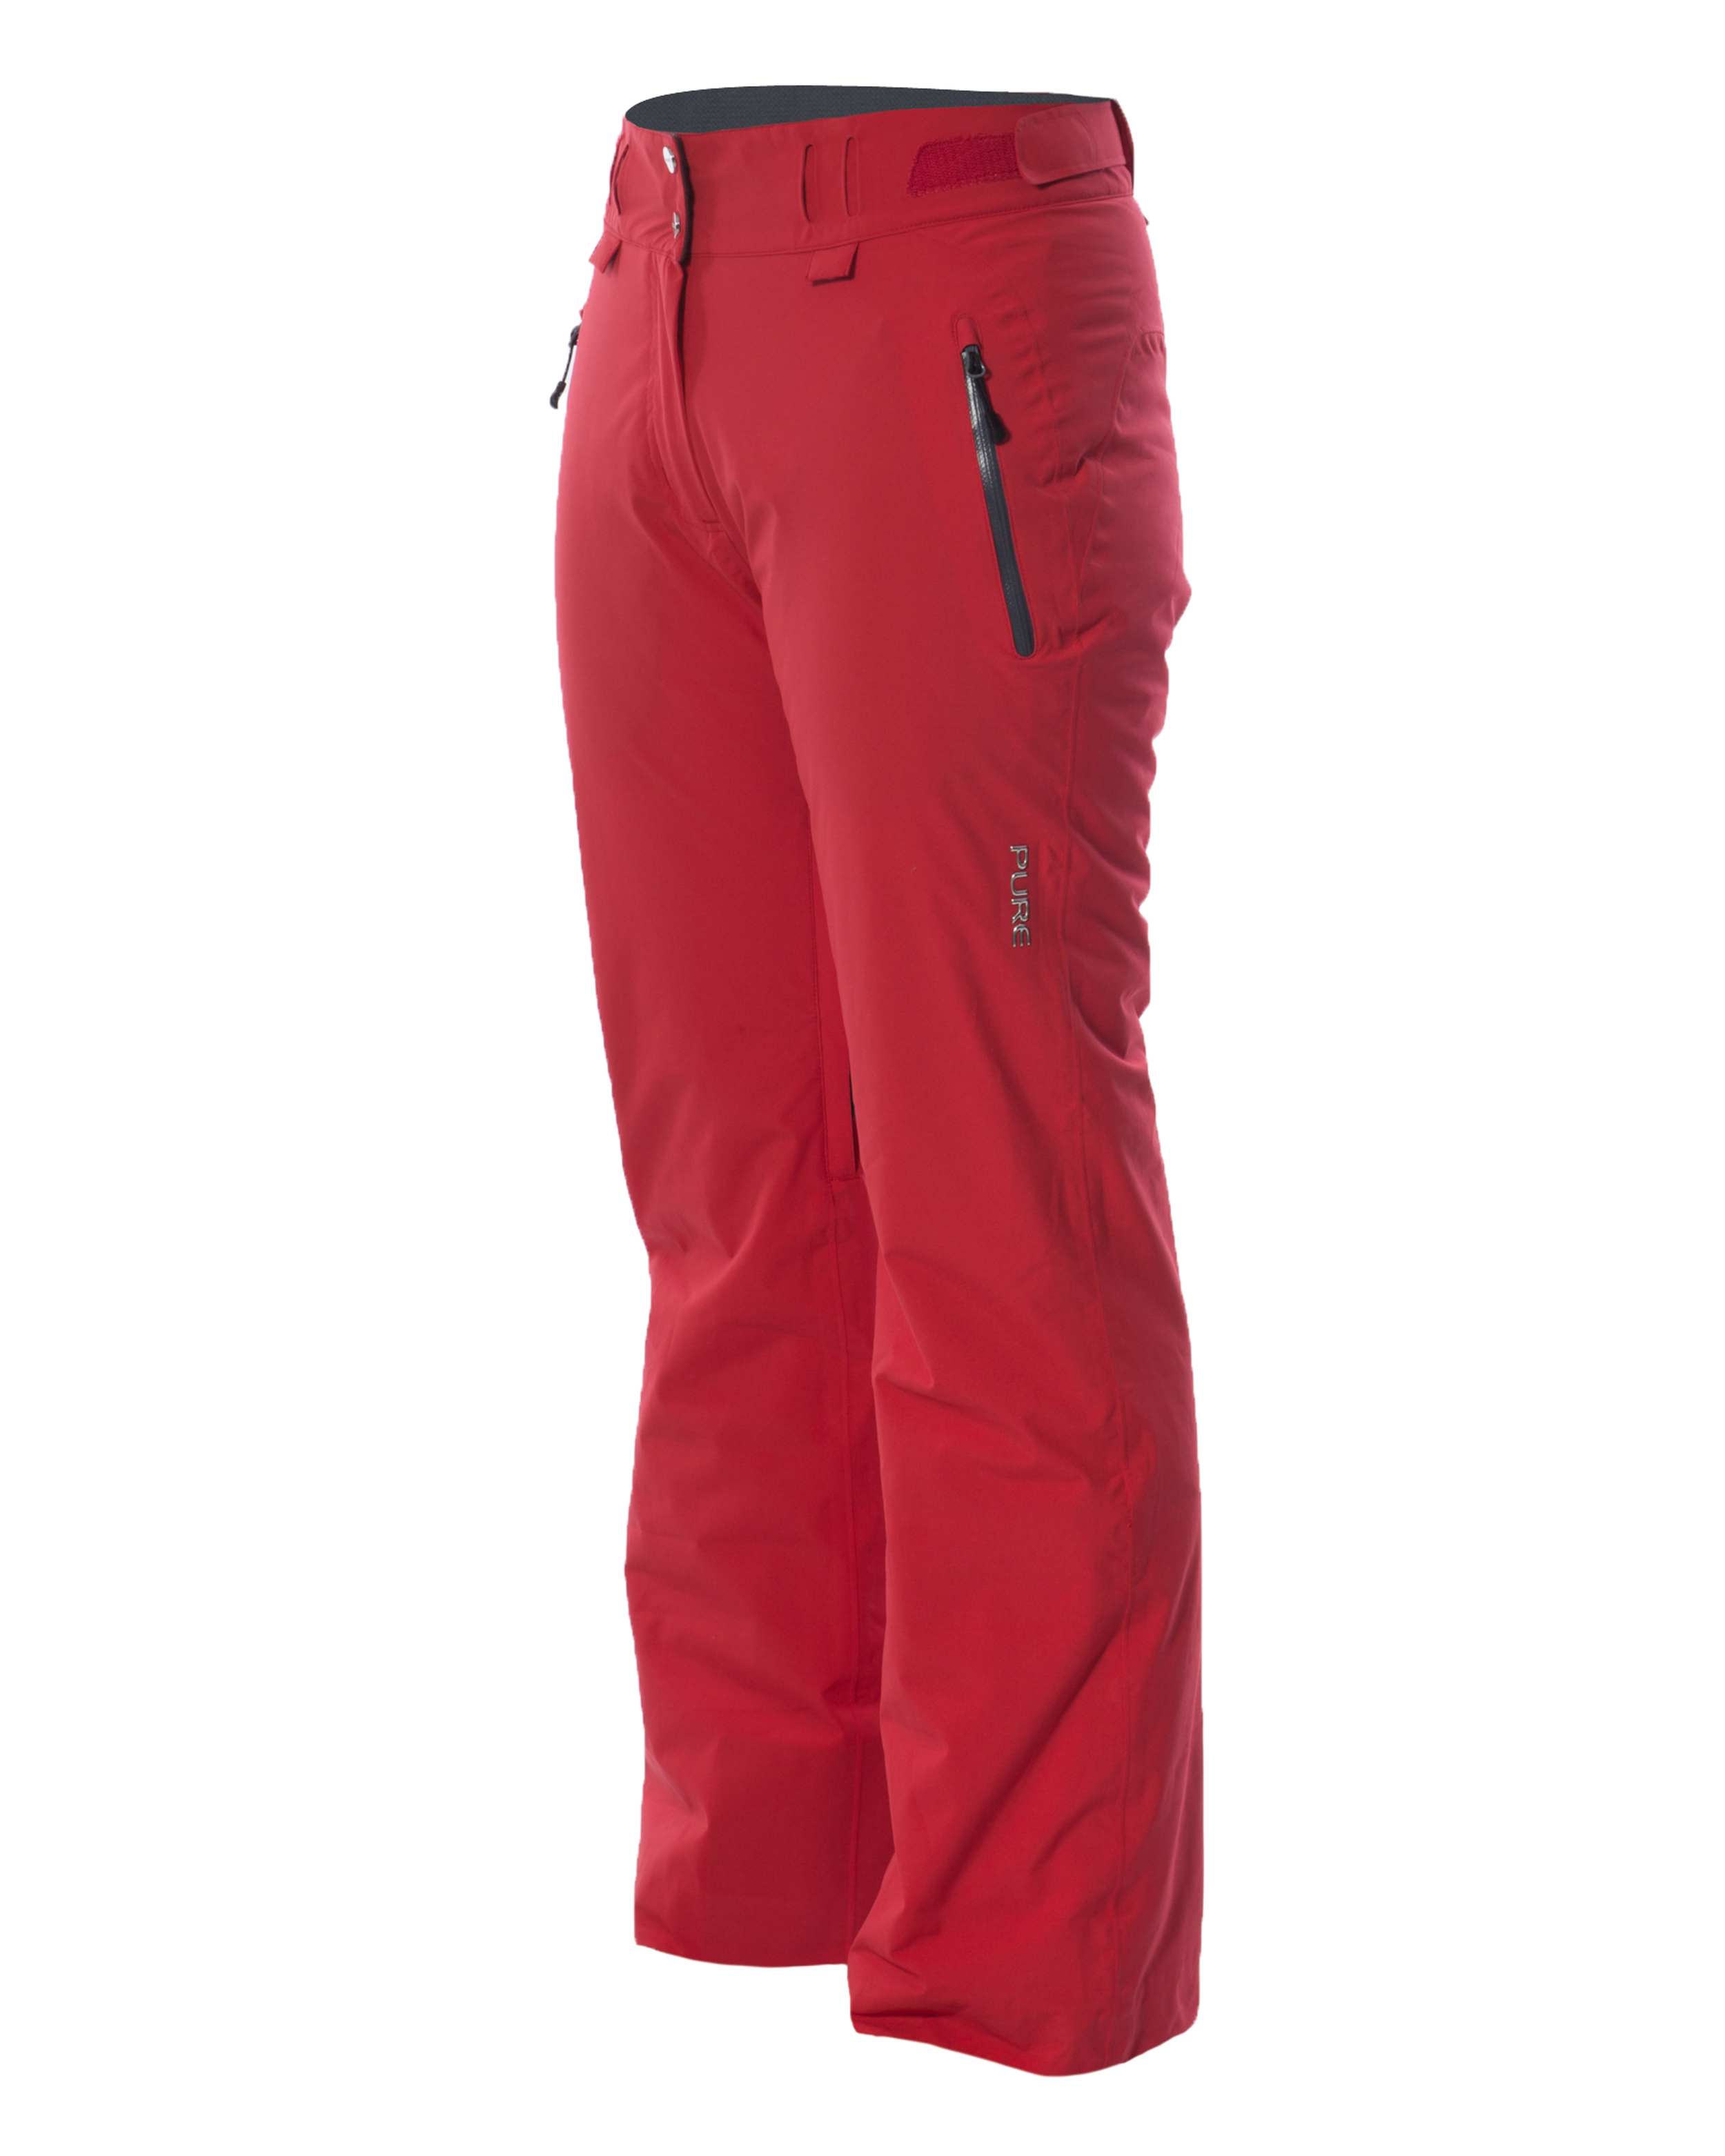 Remarkables Women’s Pure Snow - Red